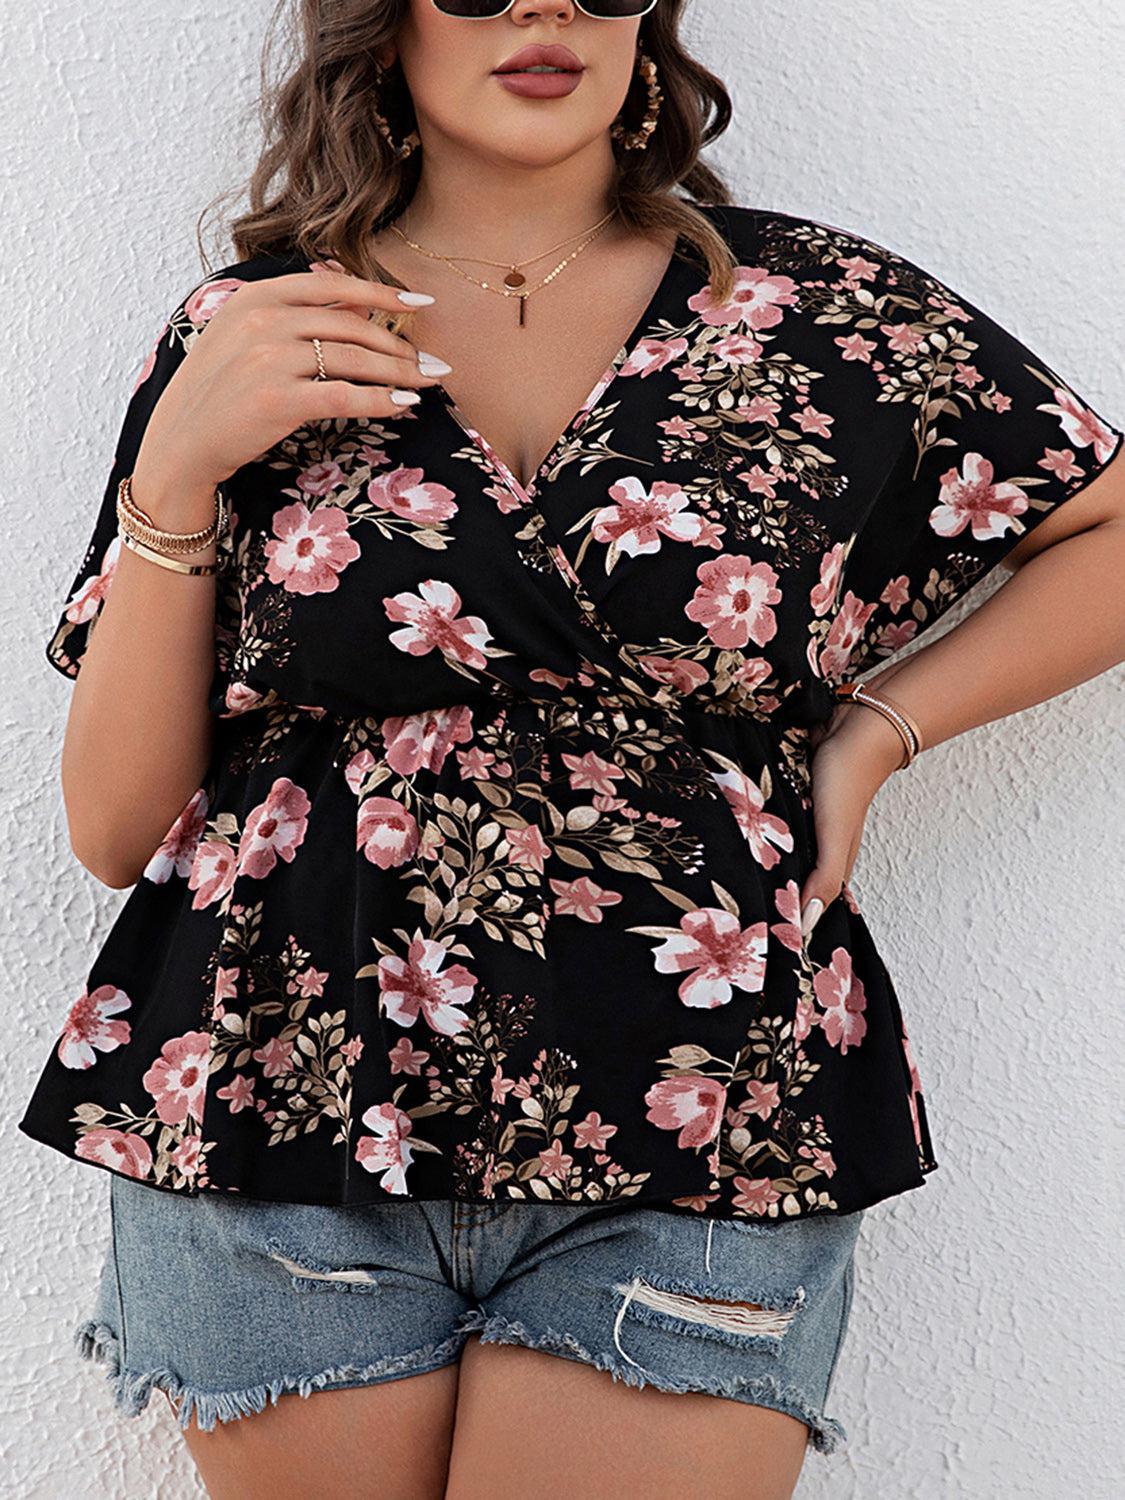 a woman in a floral top poses for a picture